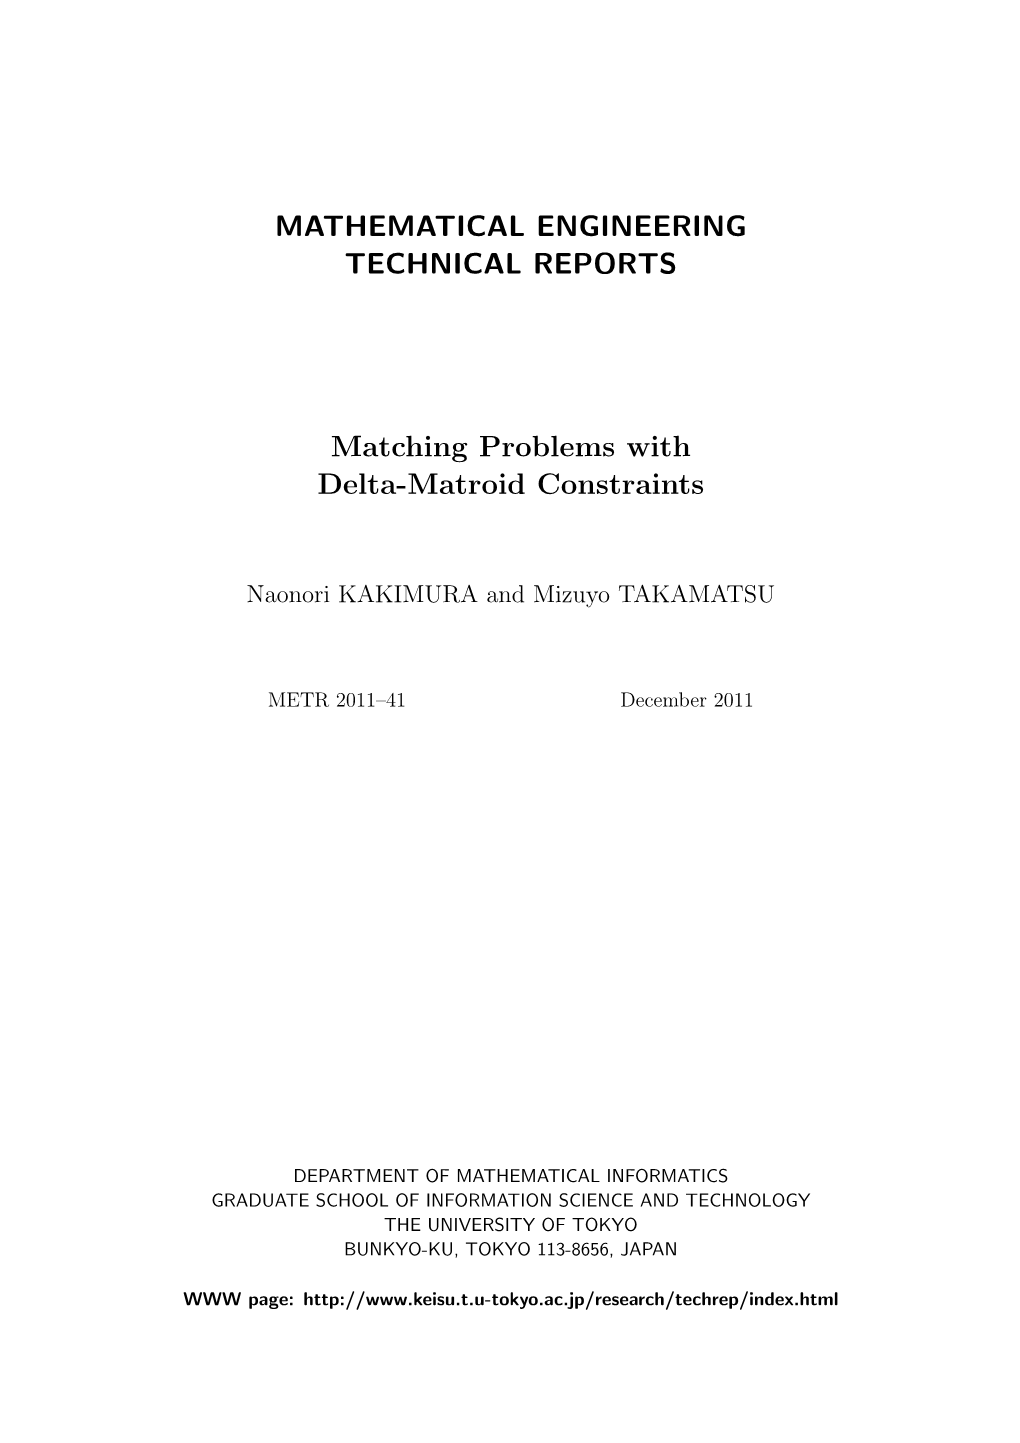 MATHEMATICAL ENGINEERING TECHNICAL REPORTS Matching